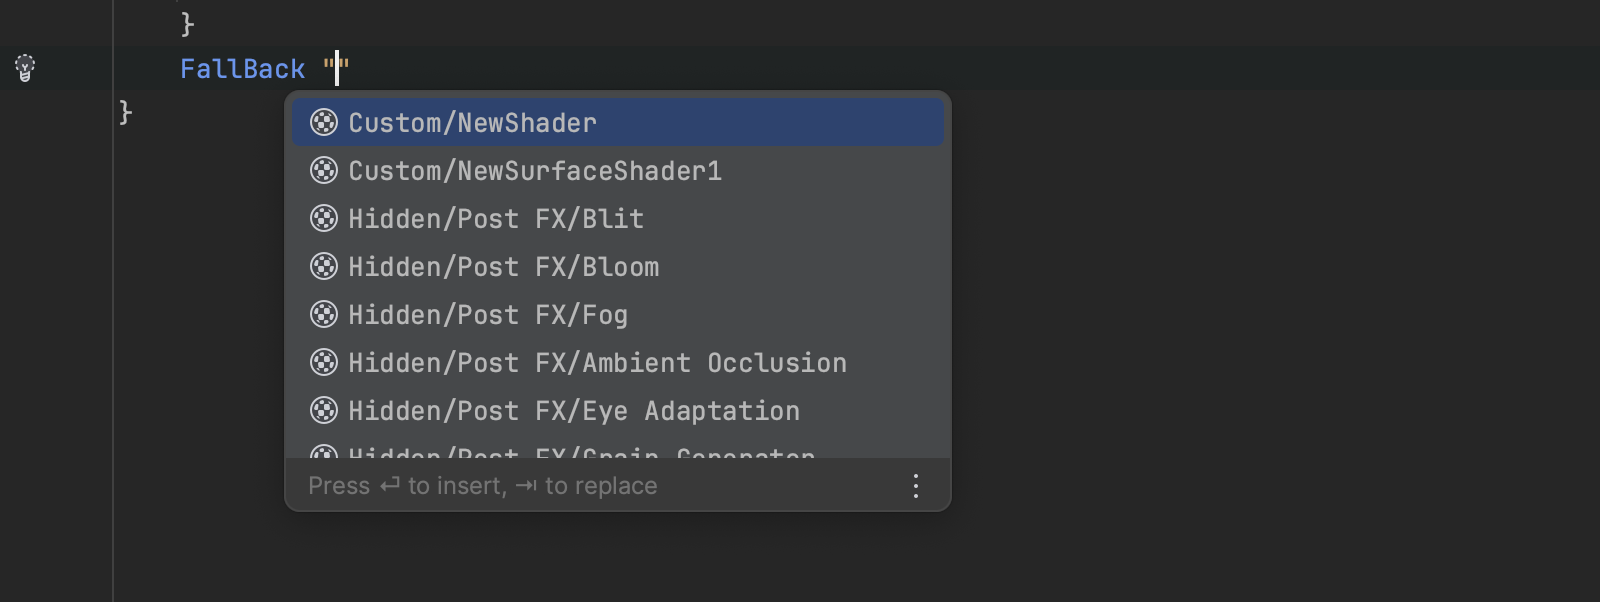 Completion of the shader name in the Fallback command